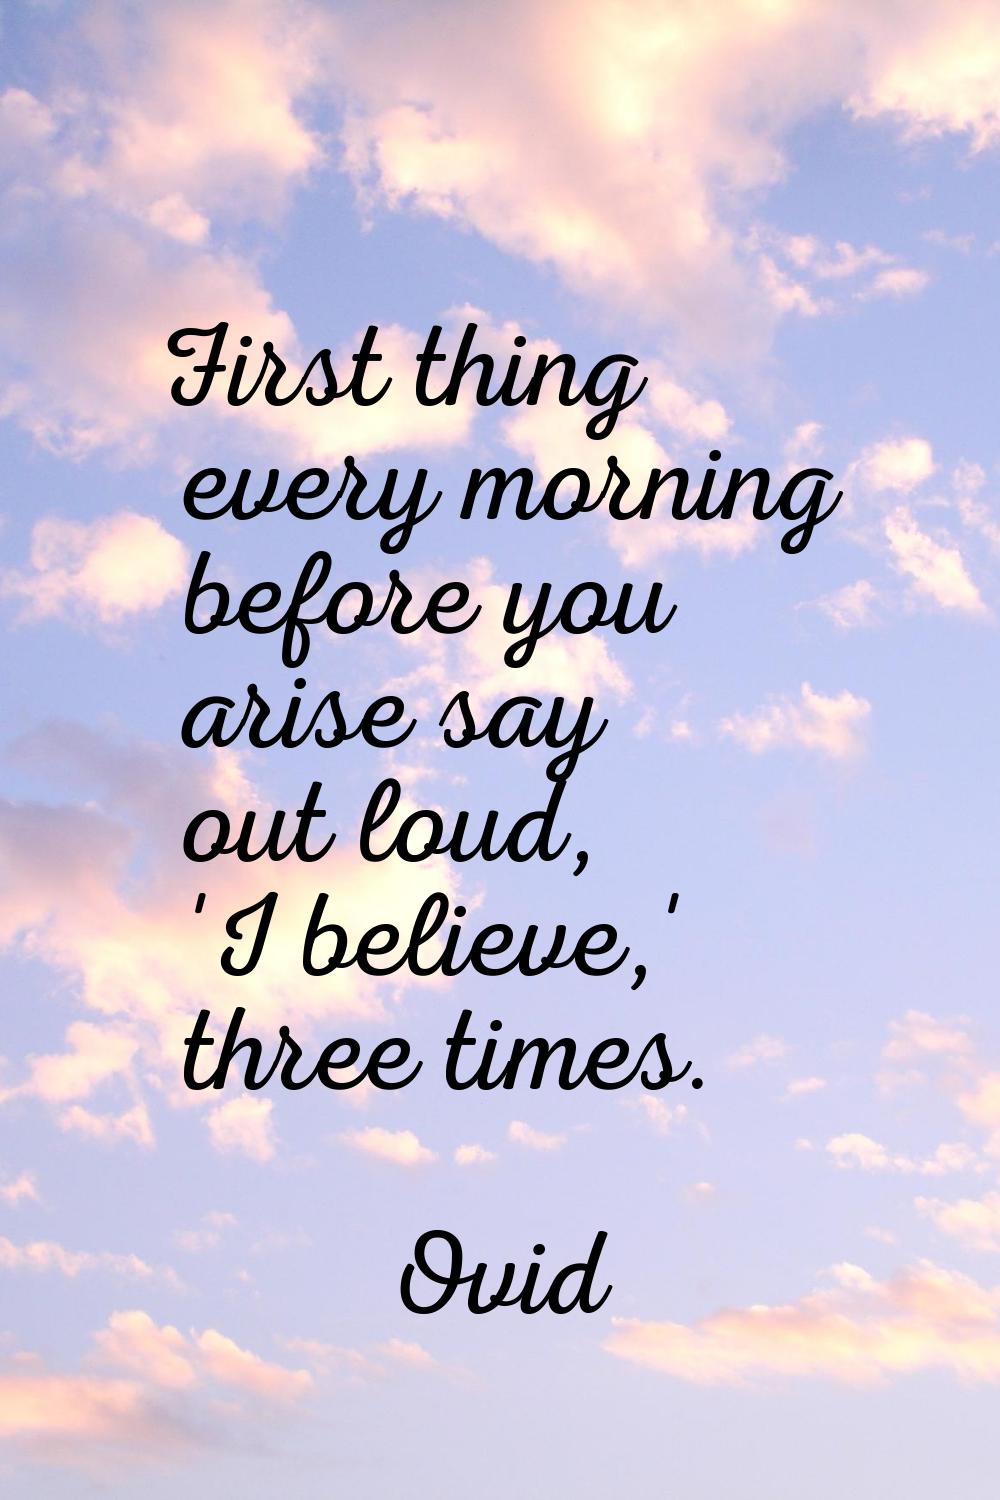 First thing every morning before you arise say out loud, 'I believe,' three times.